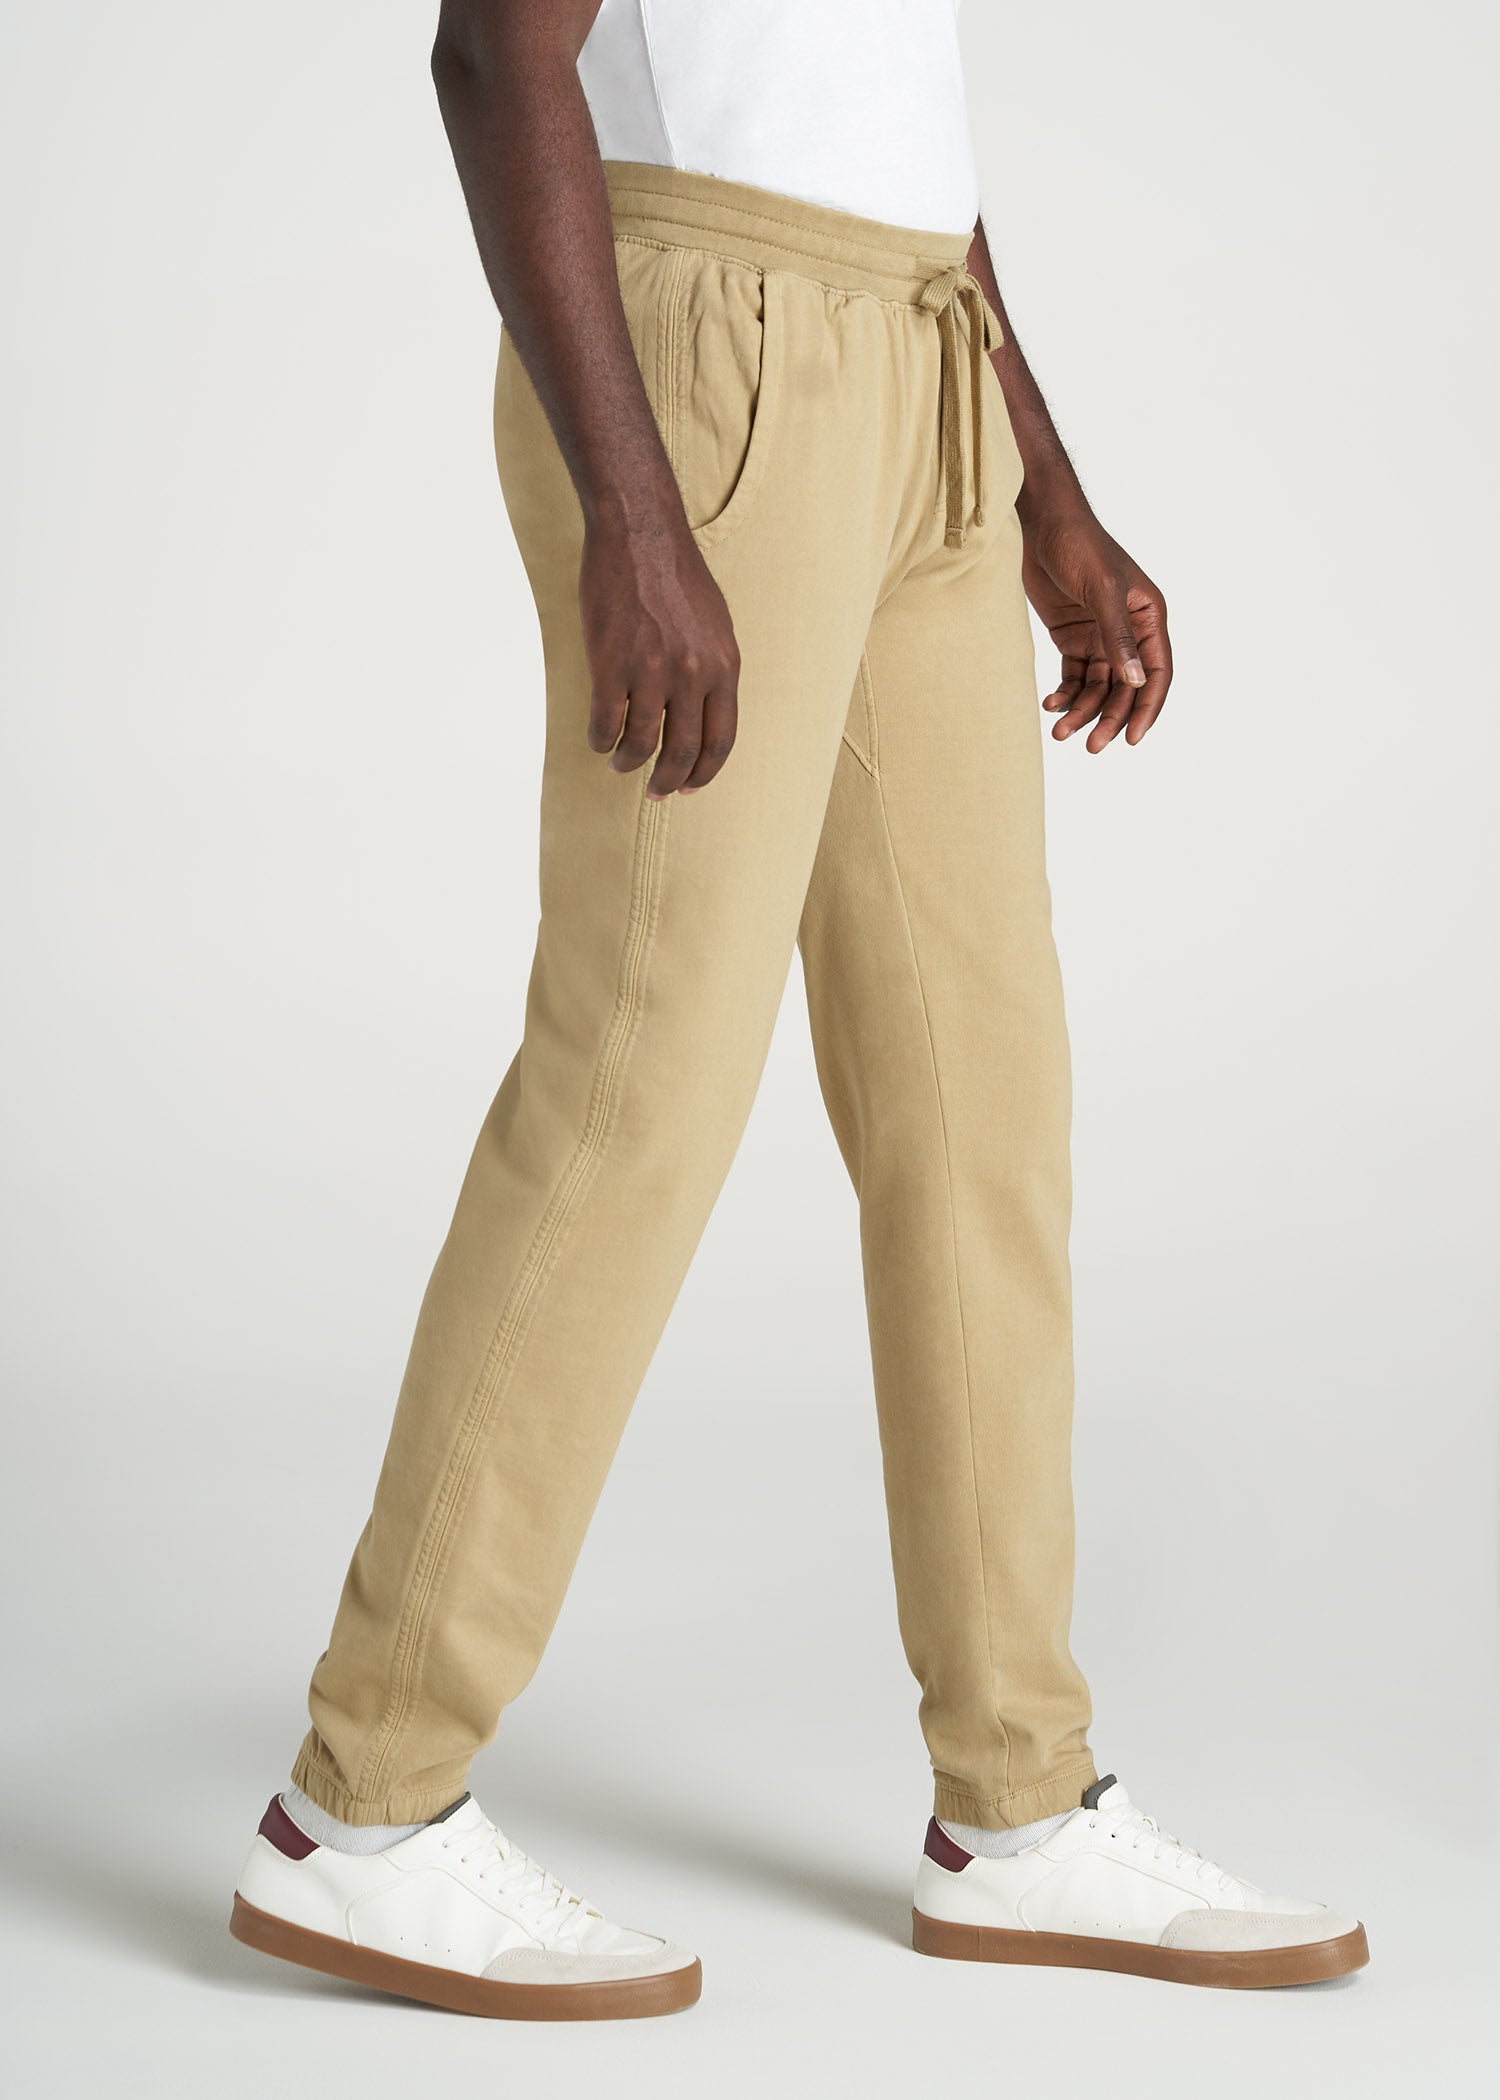 LJ&S Pigment-Dyed Sweatpants for Tall Men in Vintage Buck